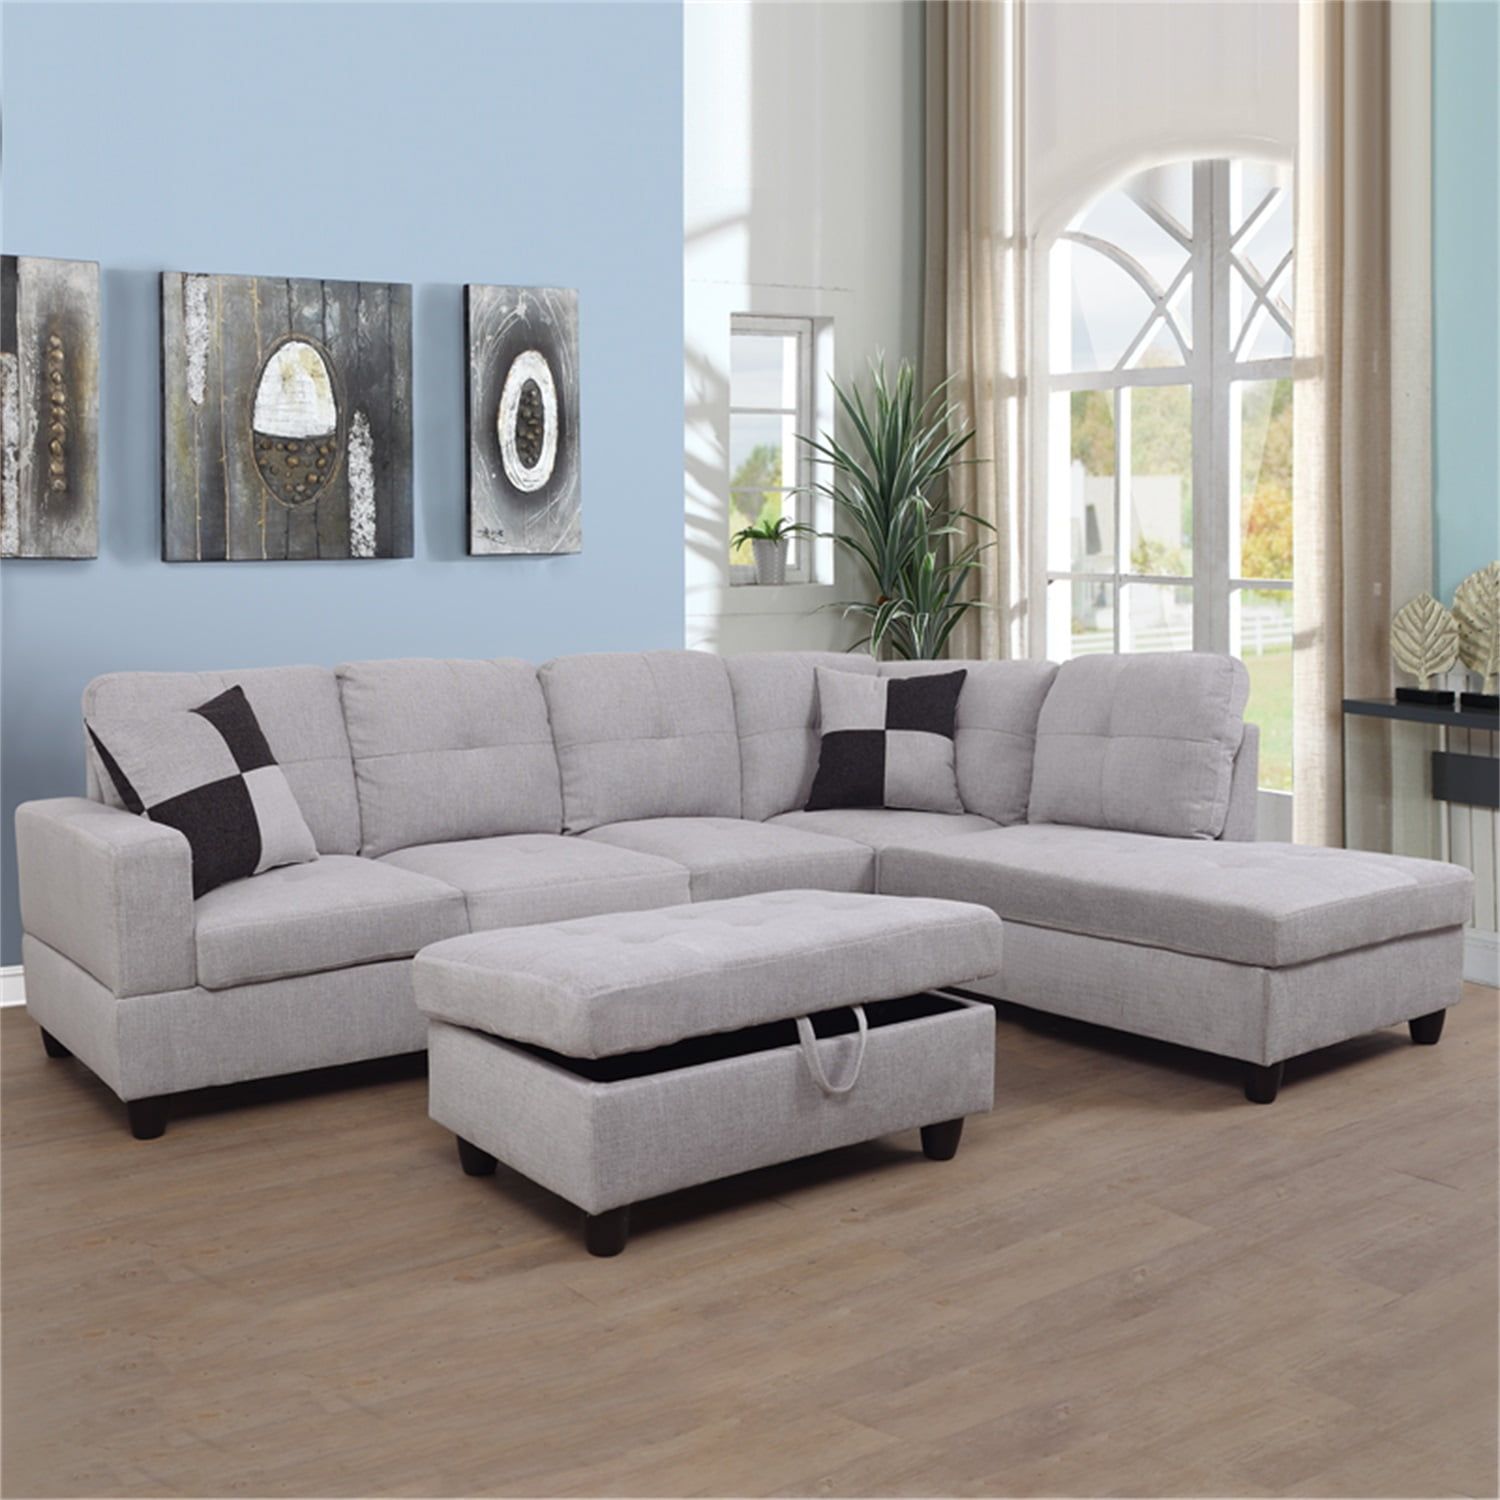 Hommoo Couch Sofa Set, Modern L Shaped Sofa For Living Room, Flannel Sectional  Sofa Set For Apartment, Off White(without Ottoman) – Walmart In Modern L Shaped Sofa Sectionals (Photo 1 of 15)